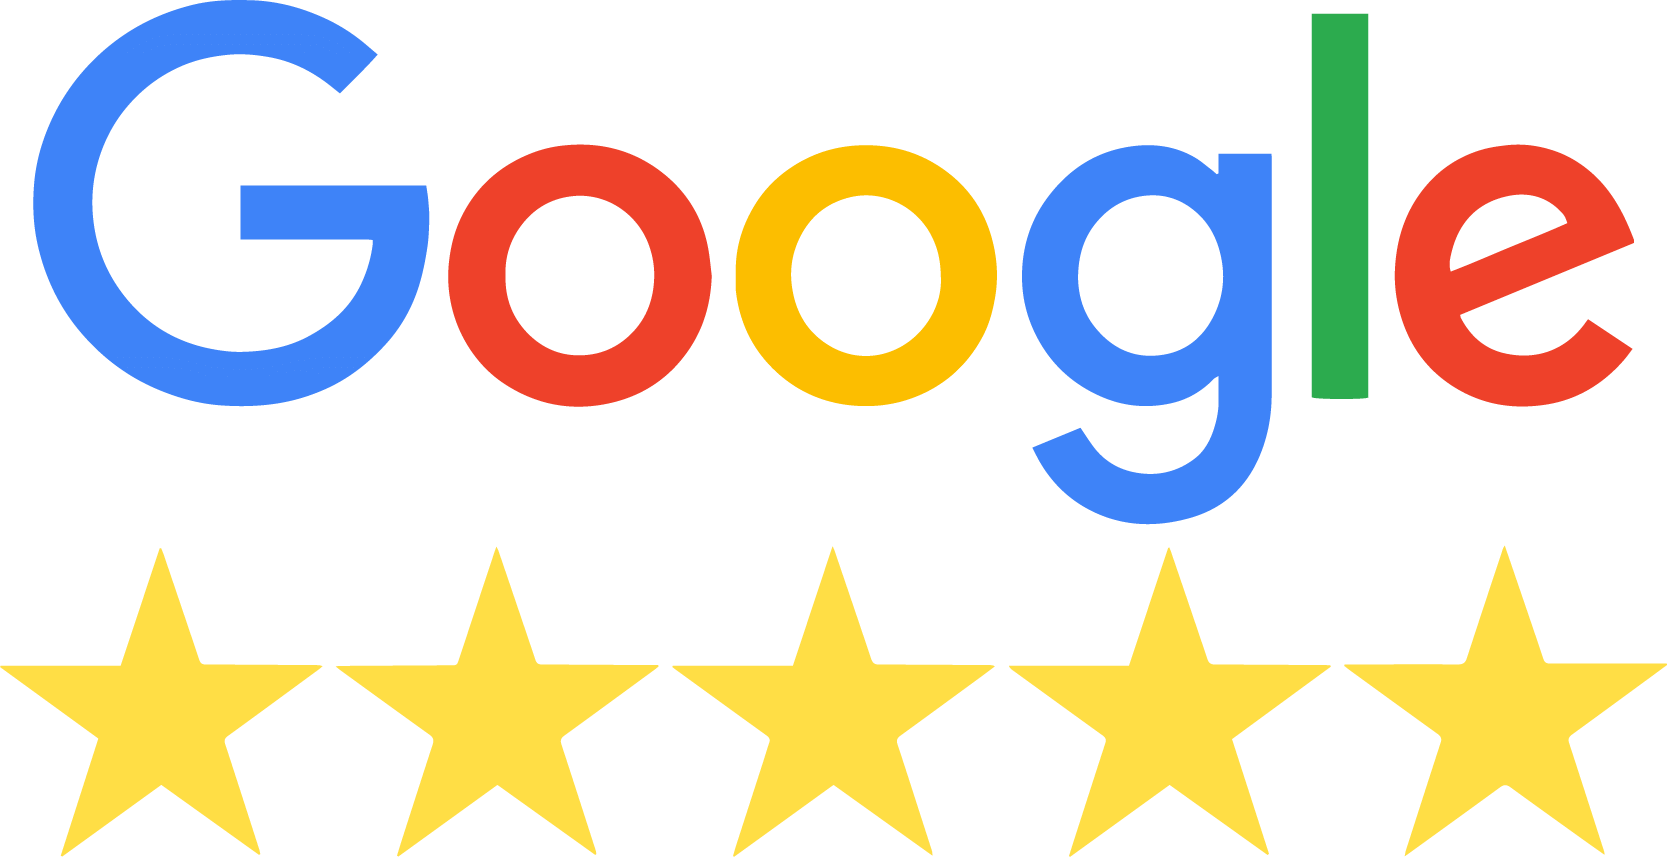 A Logo With Yellow Stars